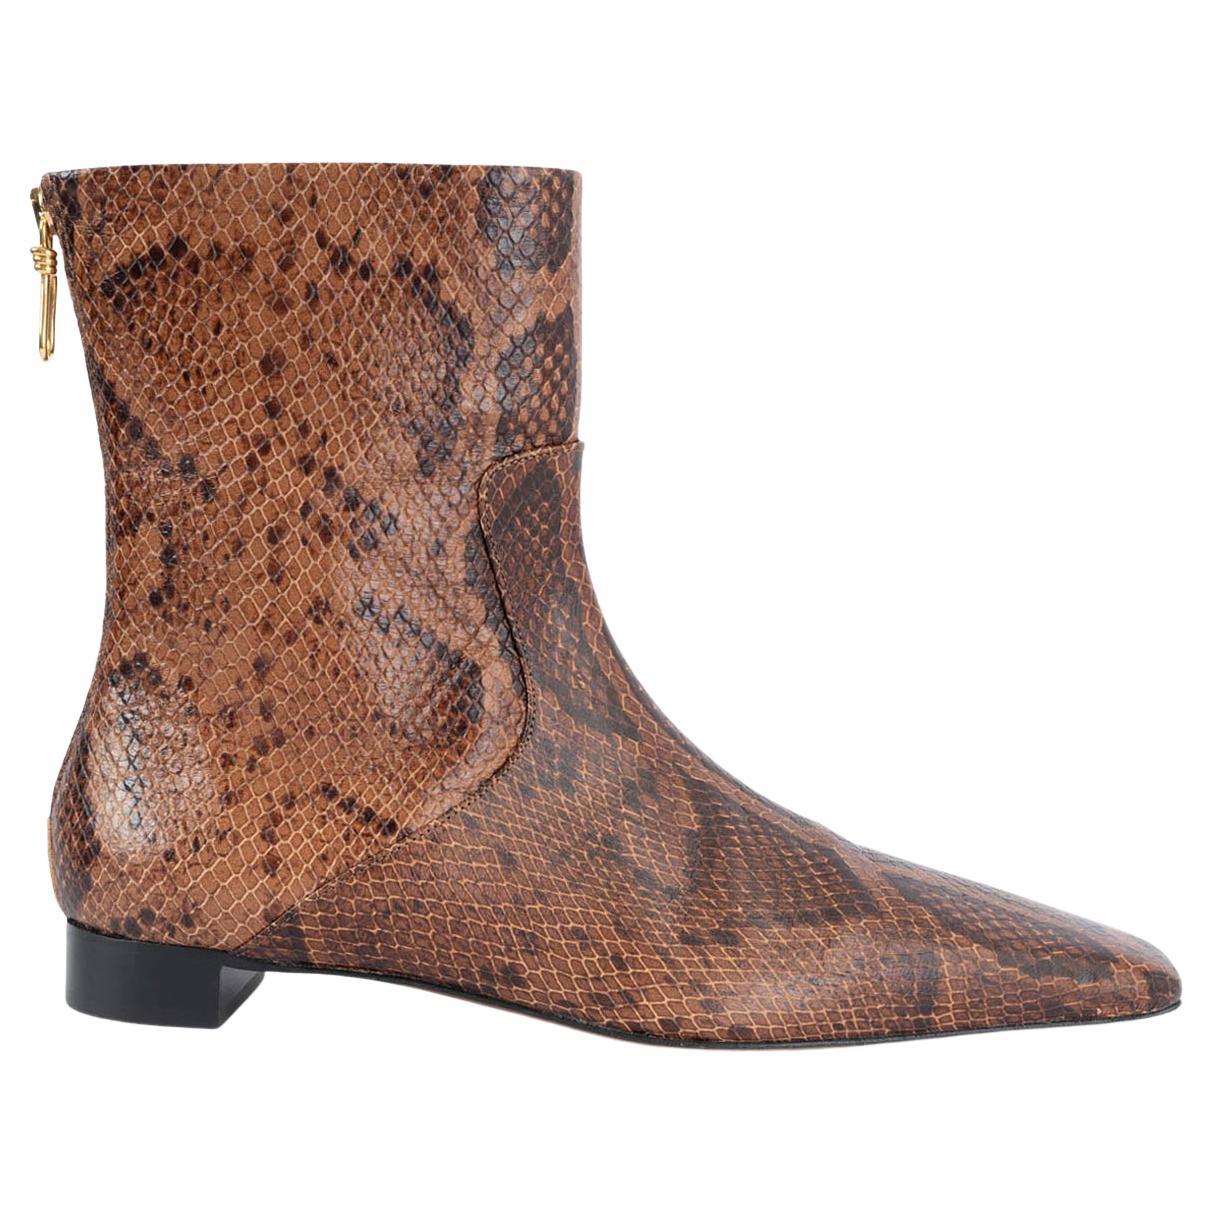 NANUSHKA brown leather TAMAL SNAKE-EFFECT Ankle Boots Shoes 38 For Sale